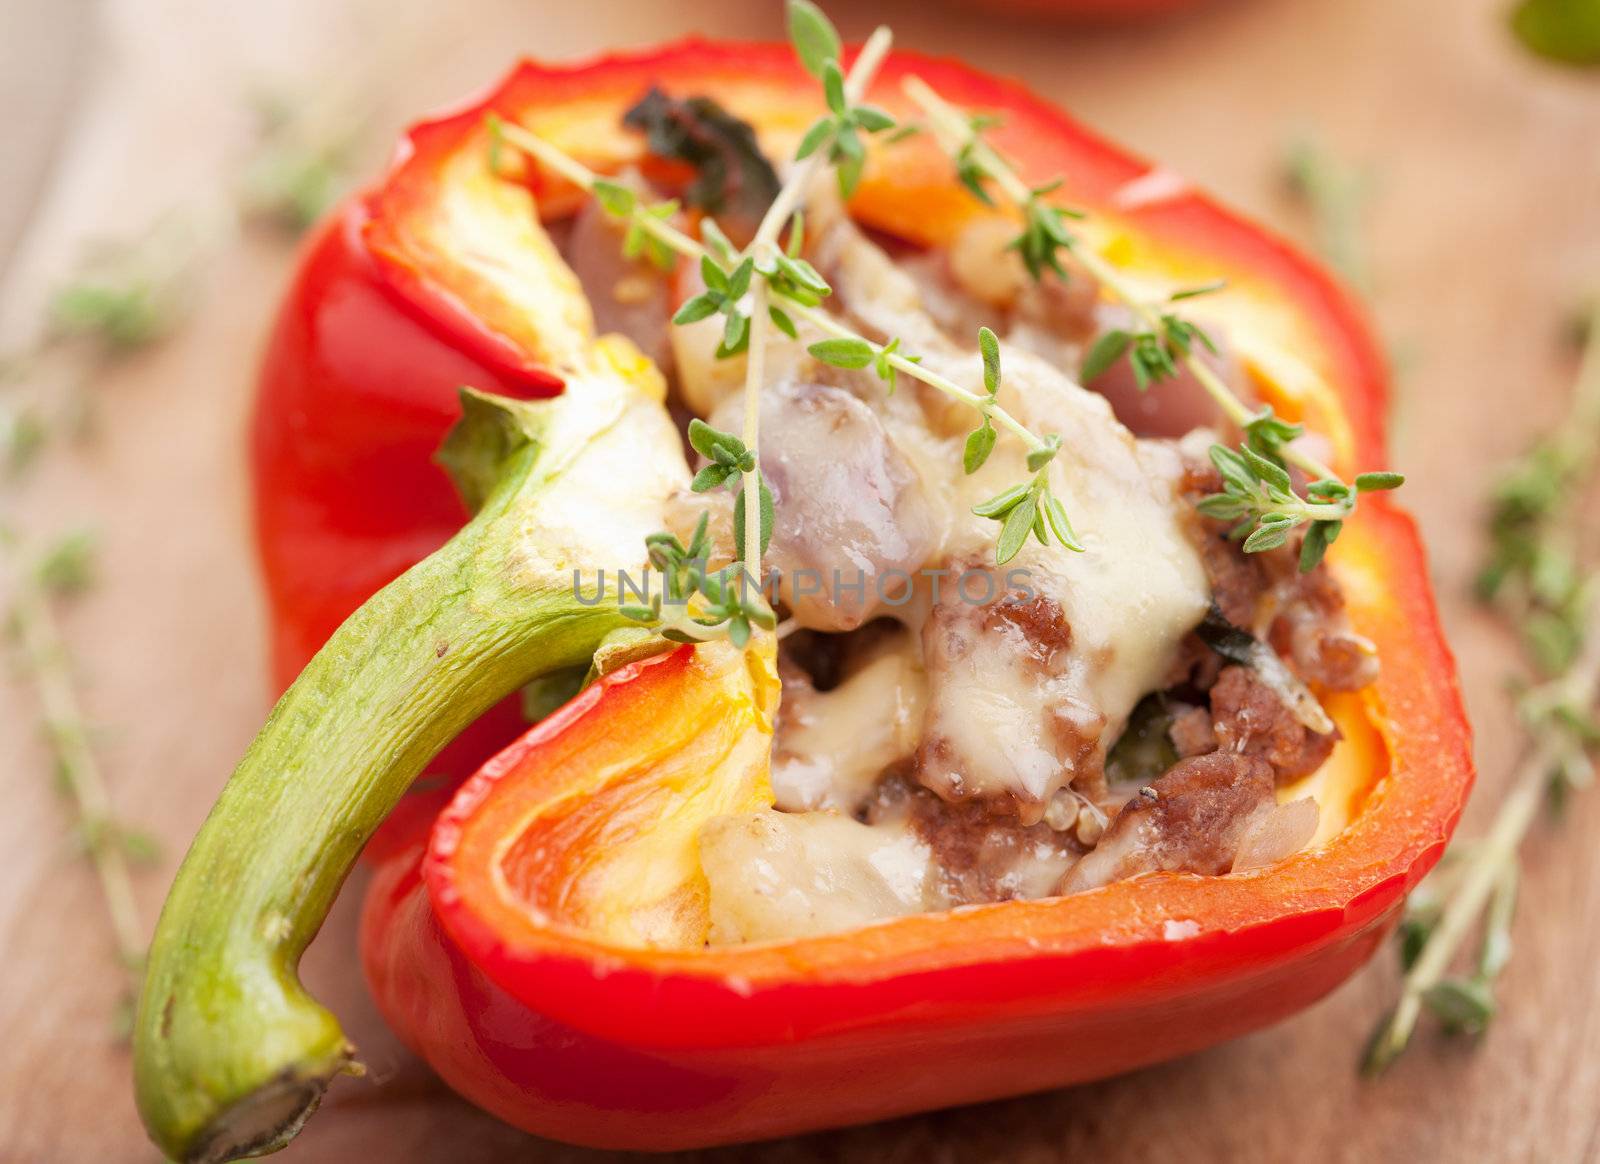 stuffed paprika with meat and vegetables 